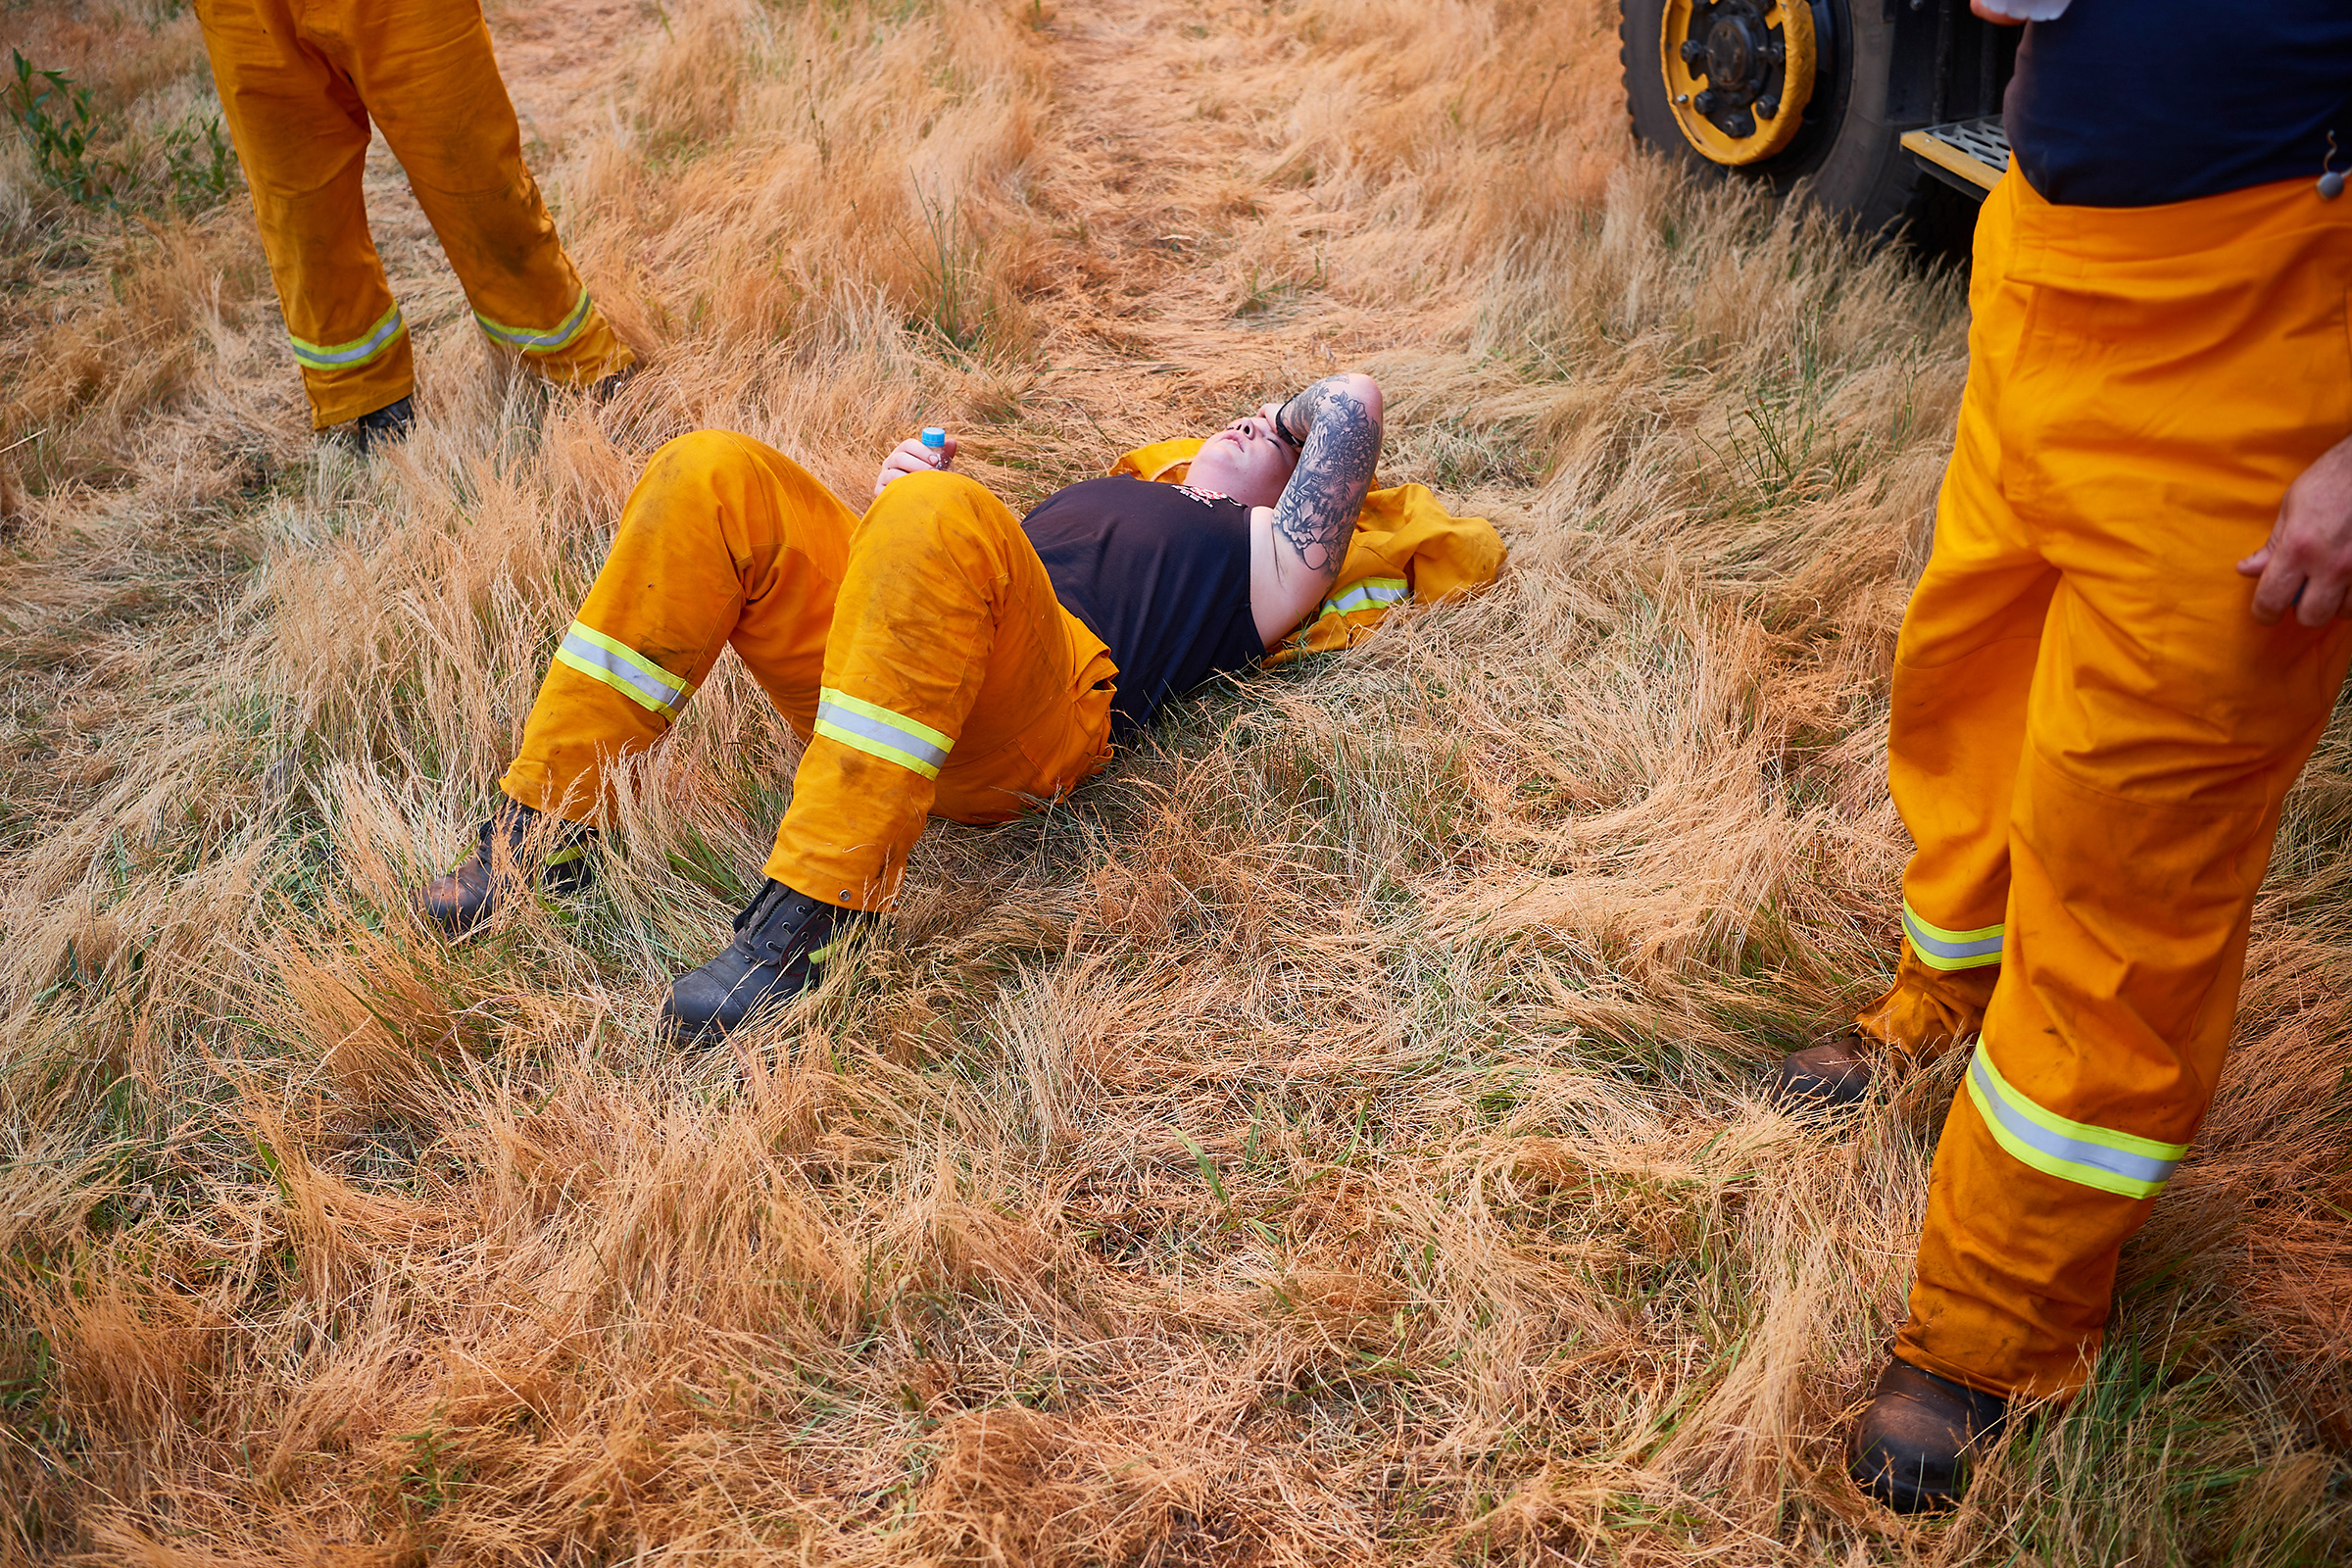 A Country Fire Authority crew member rests after a day of maintaining controlled back burns in St Albans on Nov. 21, 2019. (Brett Hemmings—Getty Images)